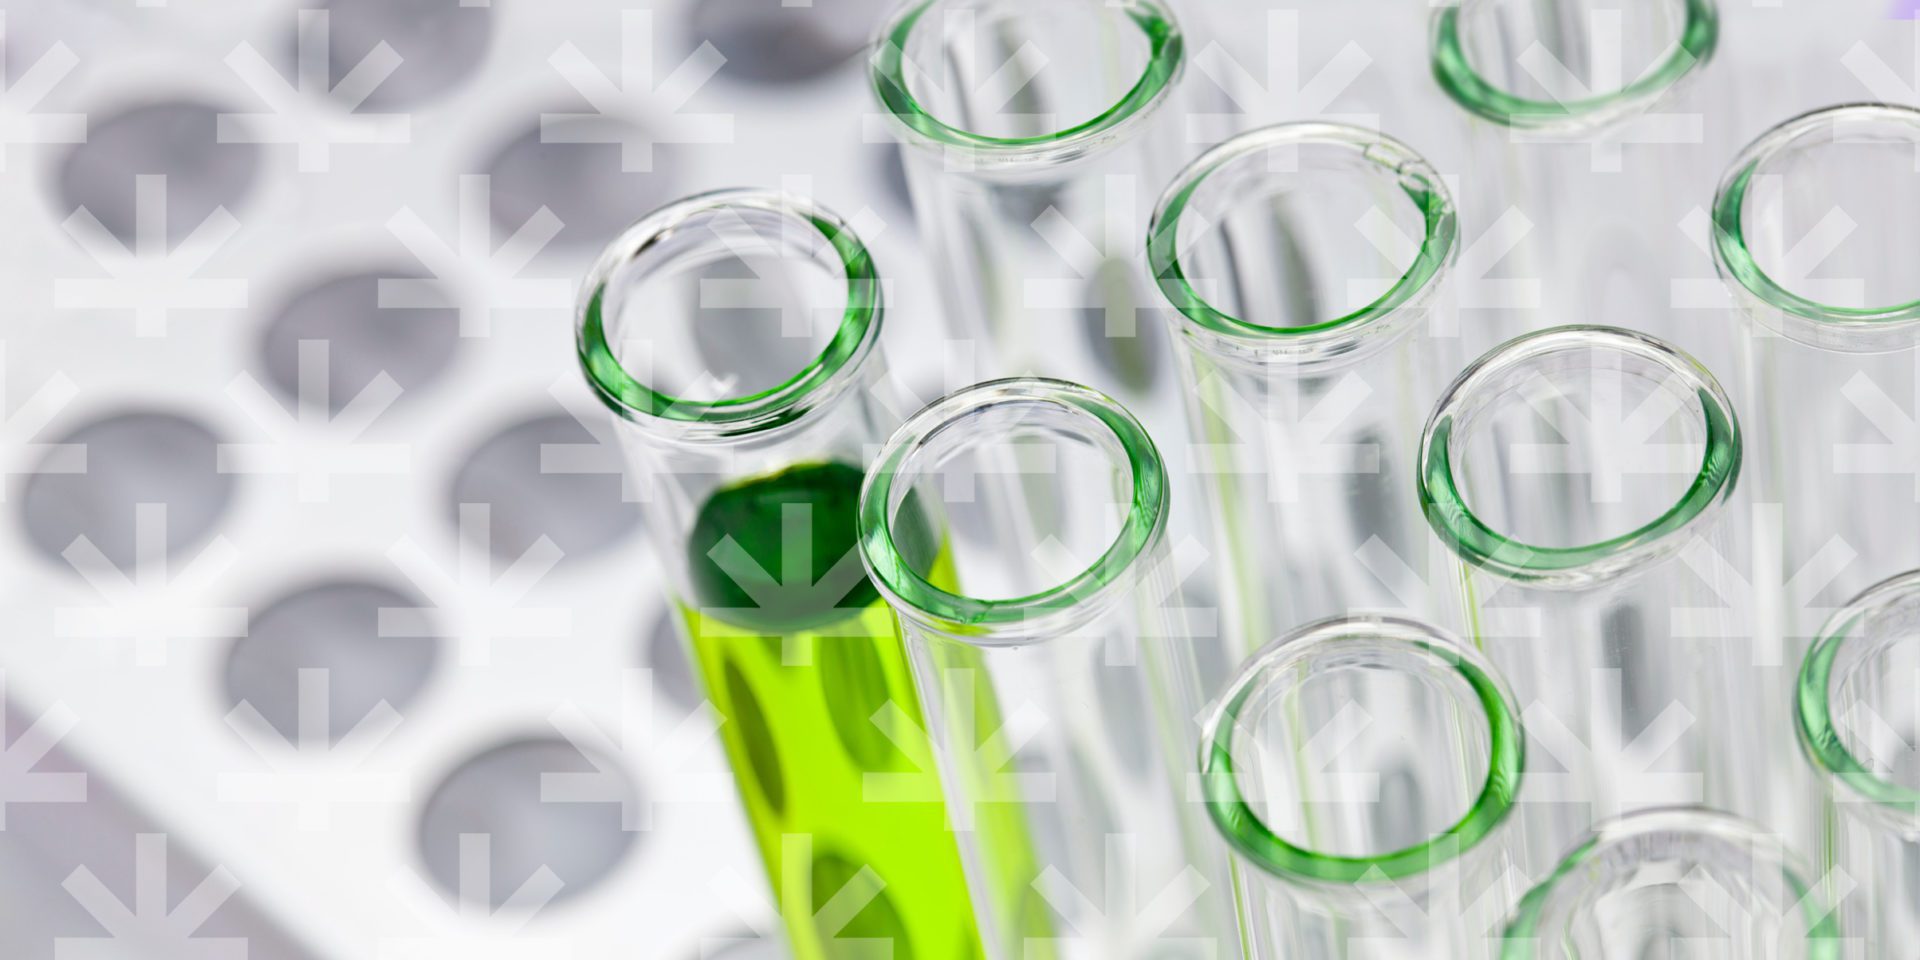 group laboratory of test tubes, one test tube contains green liquid